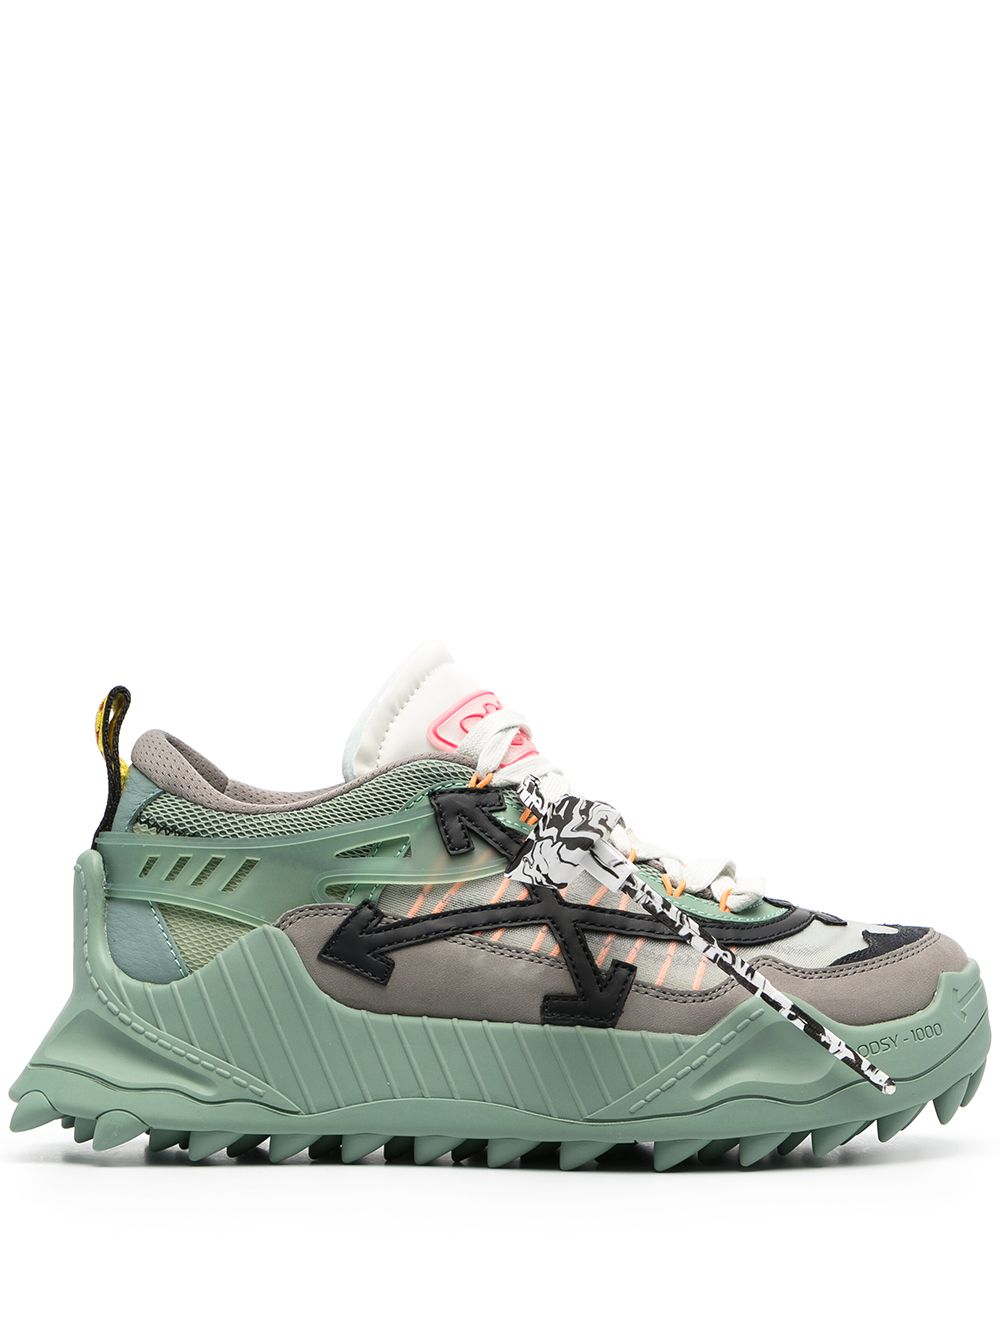 OFF-WHITE - SNEAKERS ODSY 1000